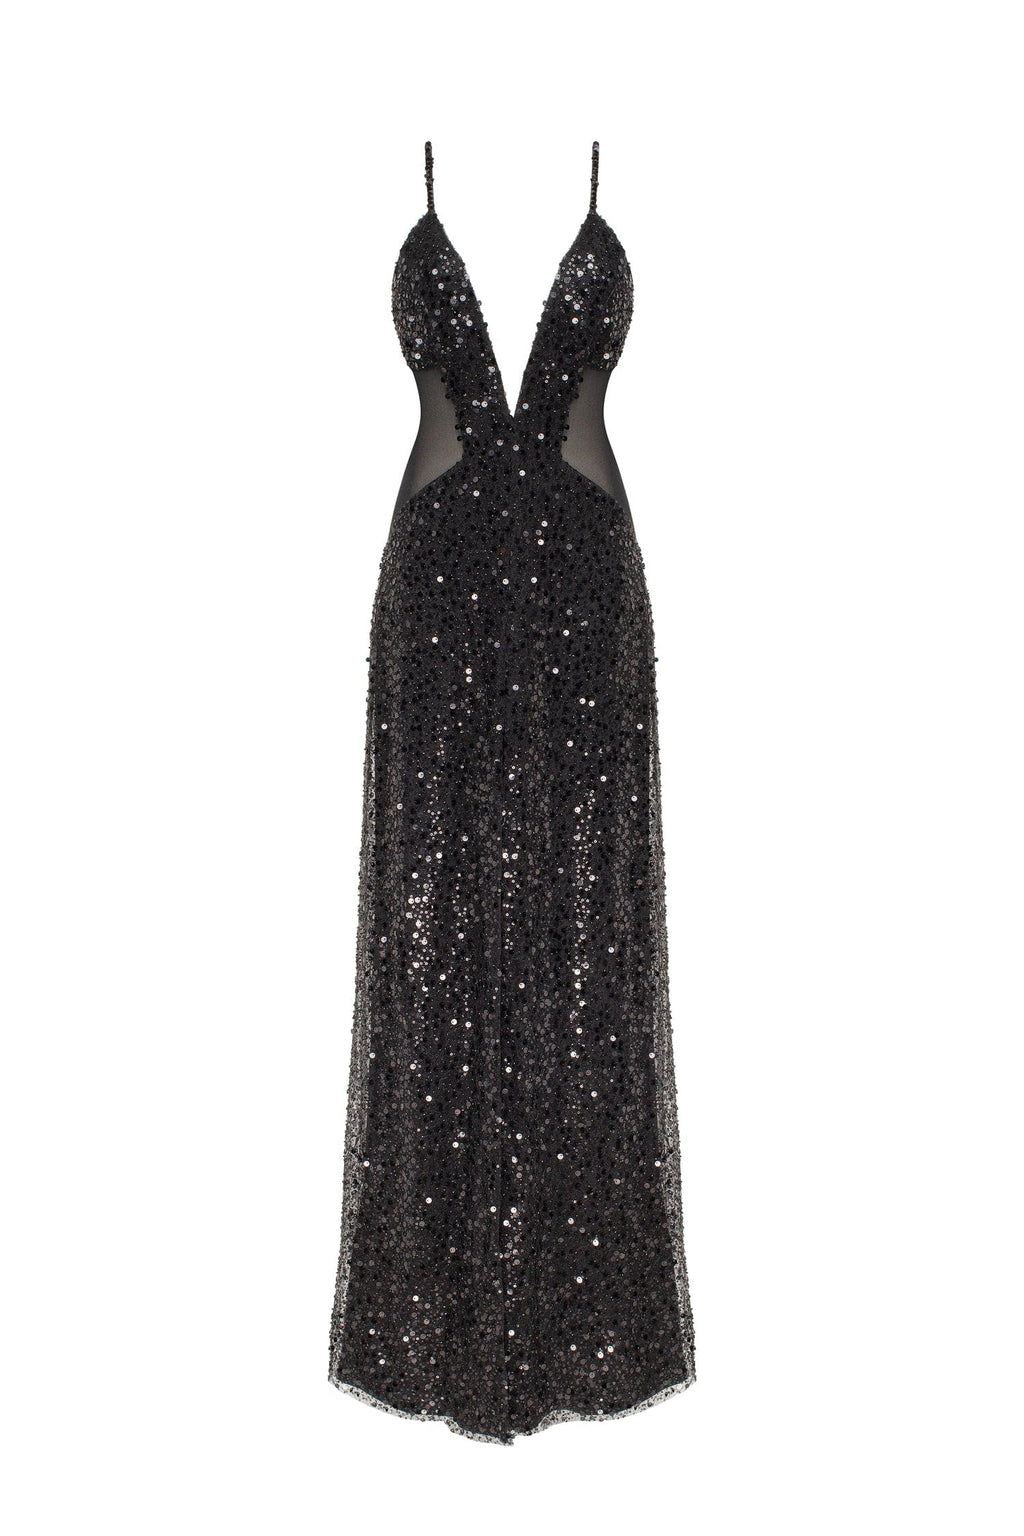 SHEIN USA  Short sparkly dresses, Silver cocktail dress, Glitter dress  outfit